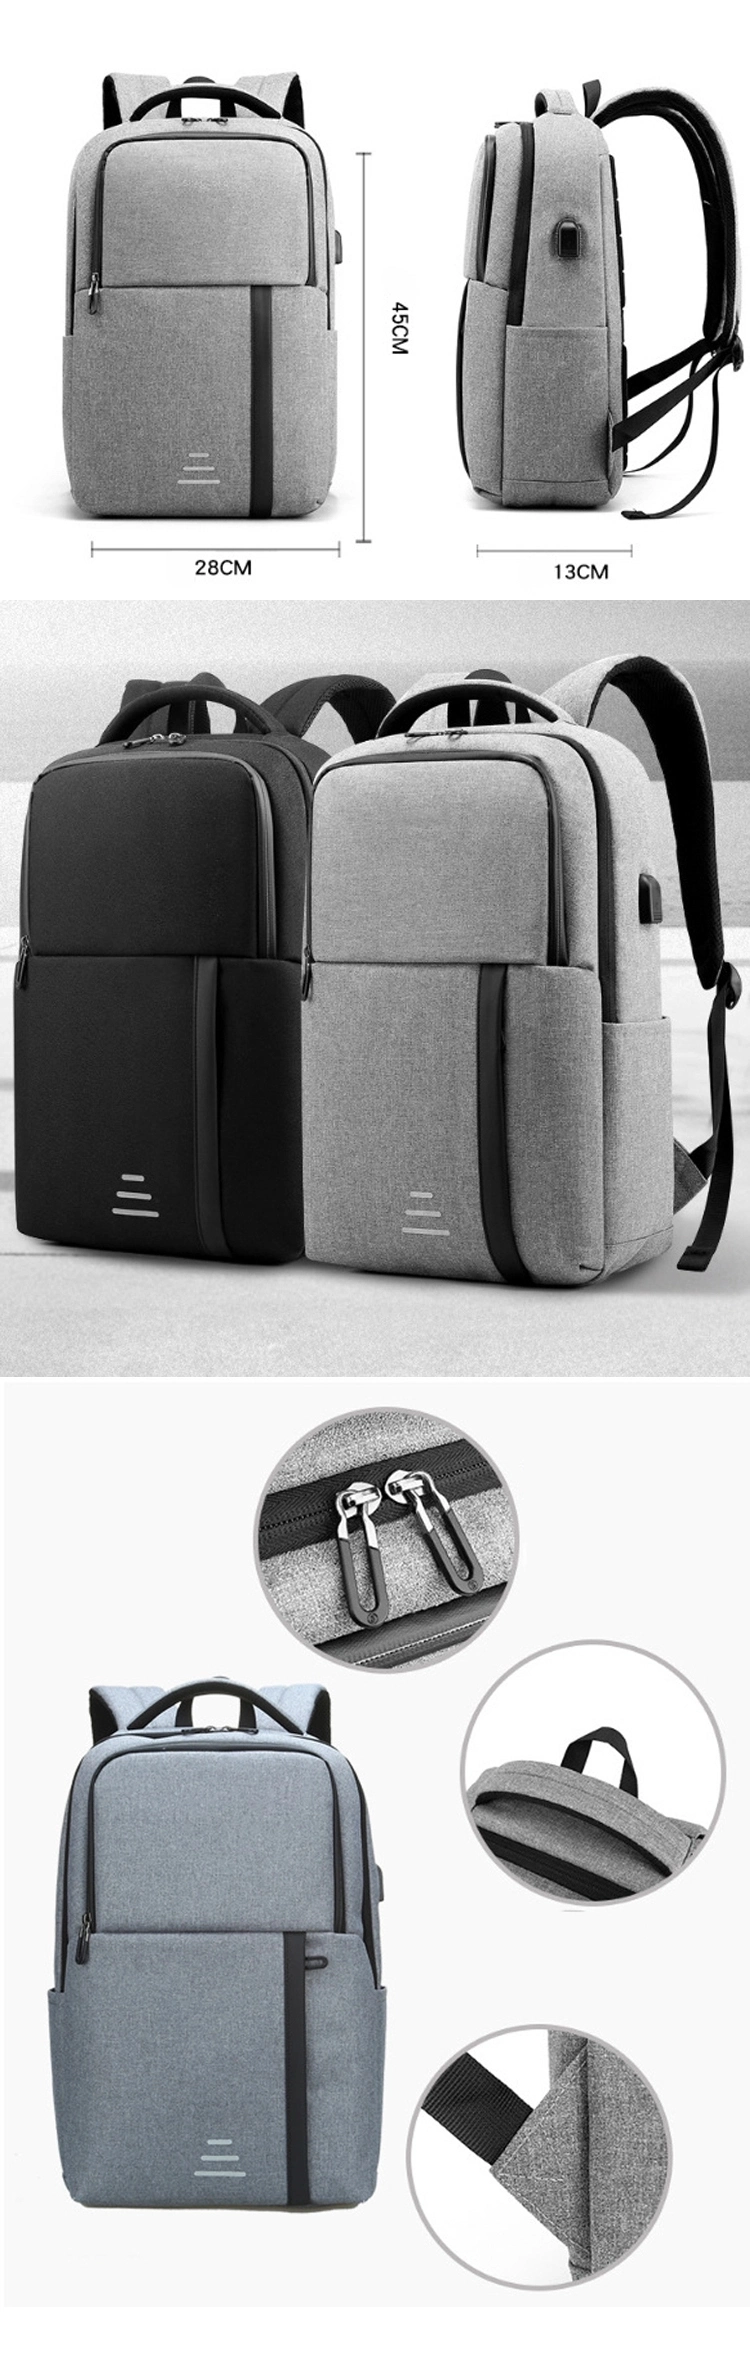 USB Charger Backpack Business Men Daily Work Laptop Backpack with Reflective Strap Travel Bag